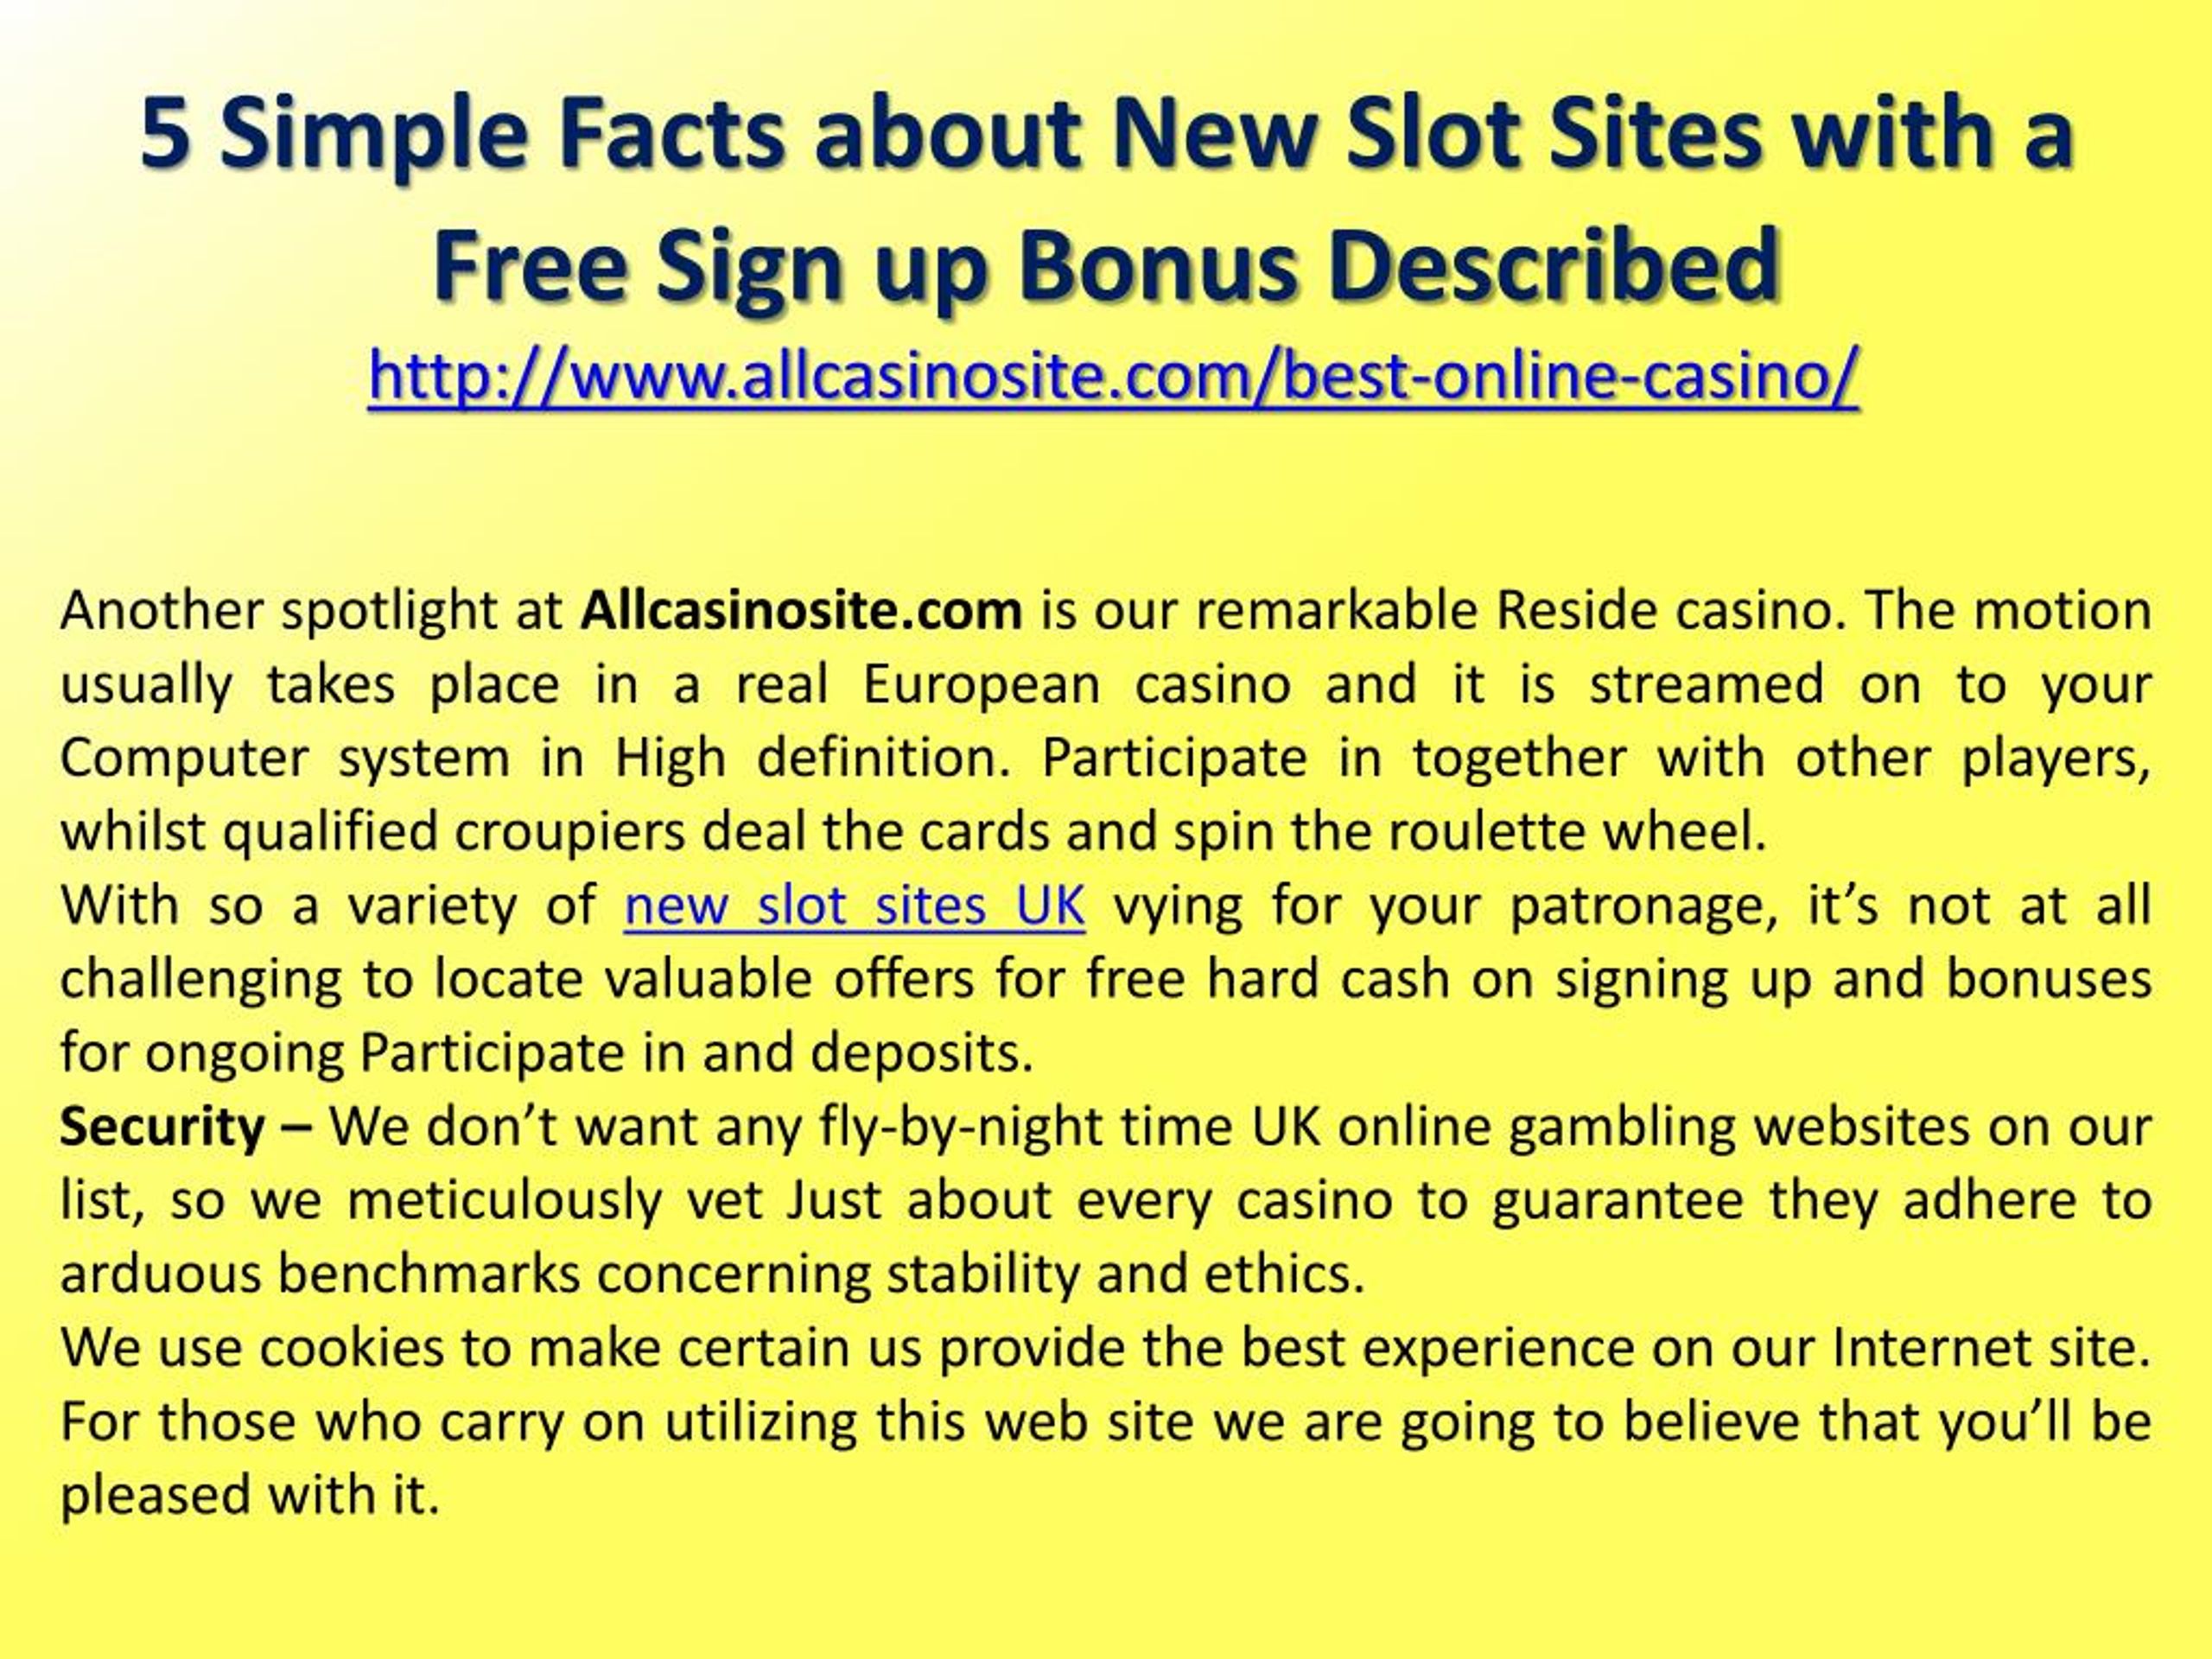 Ppt 5 Easy Facts About New Slot Sites With A Free Sign Up Bonus Described Powerpoint Presentation Id 7963921